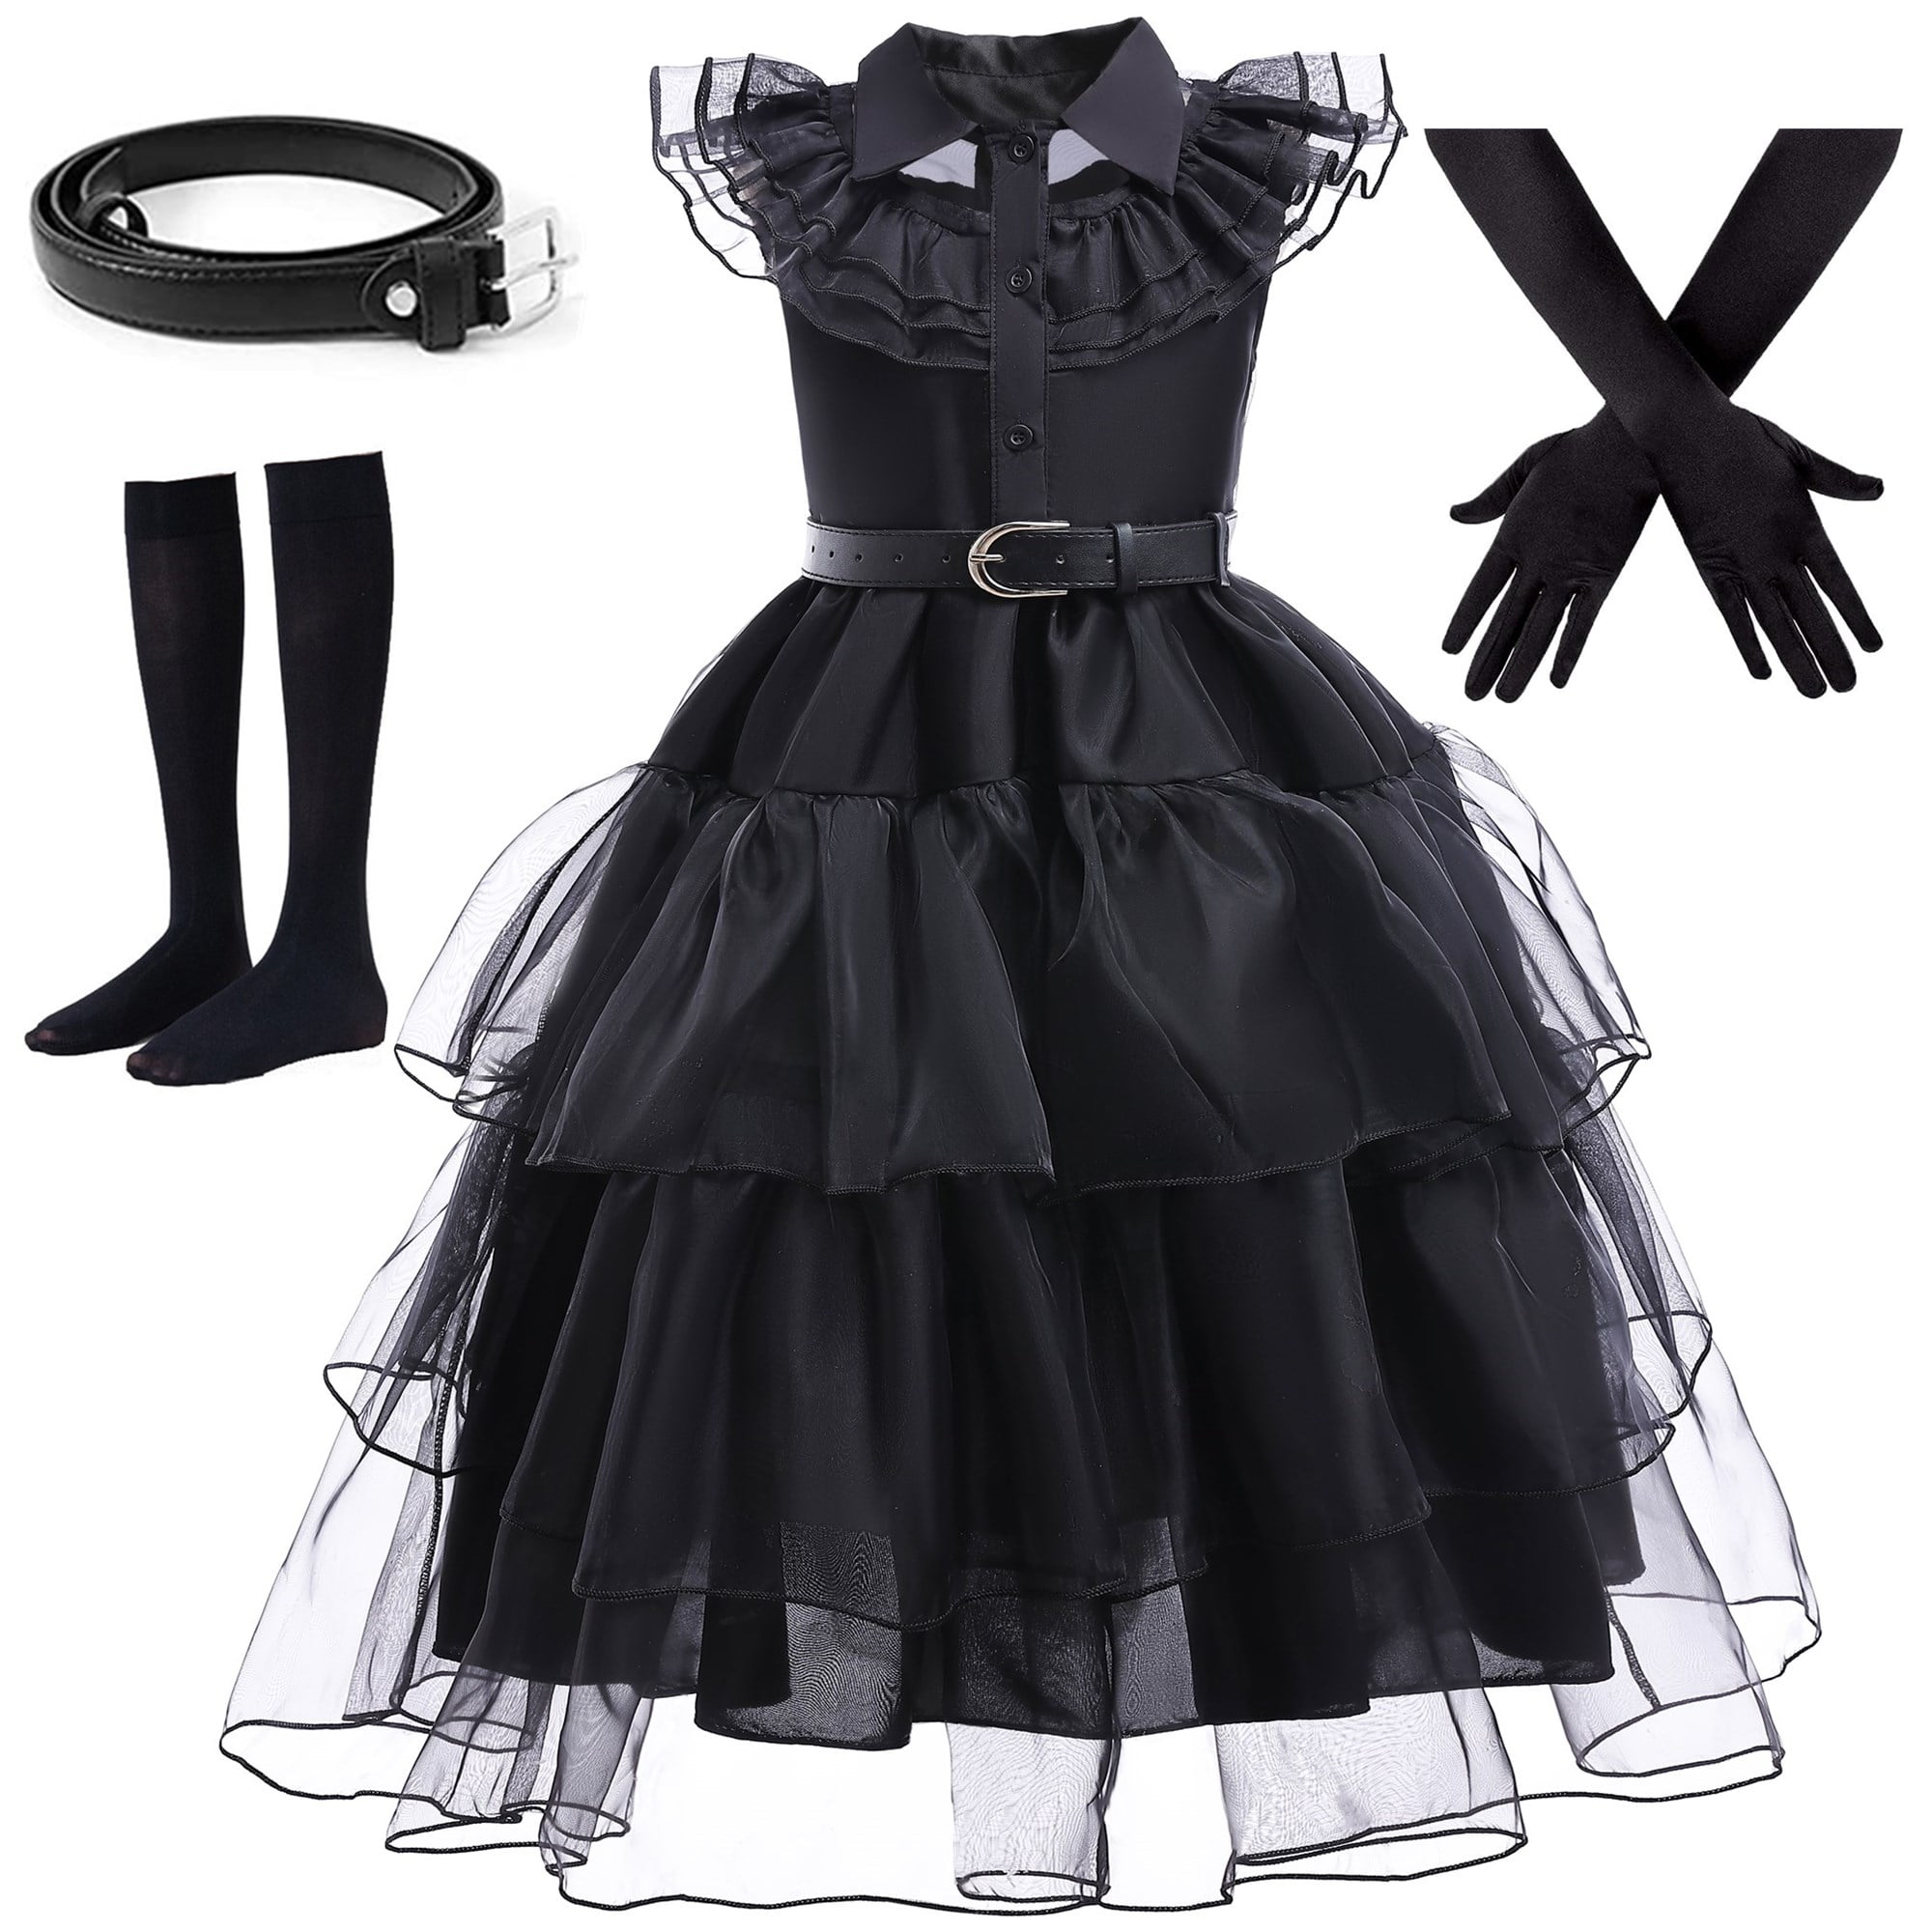 BanKids Wednesday Girls Costume Dress Addams Family Cosplay Girls Party ...